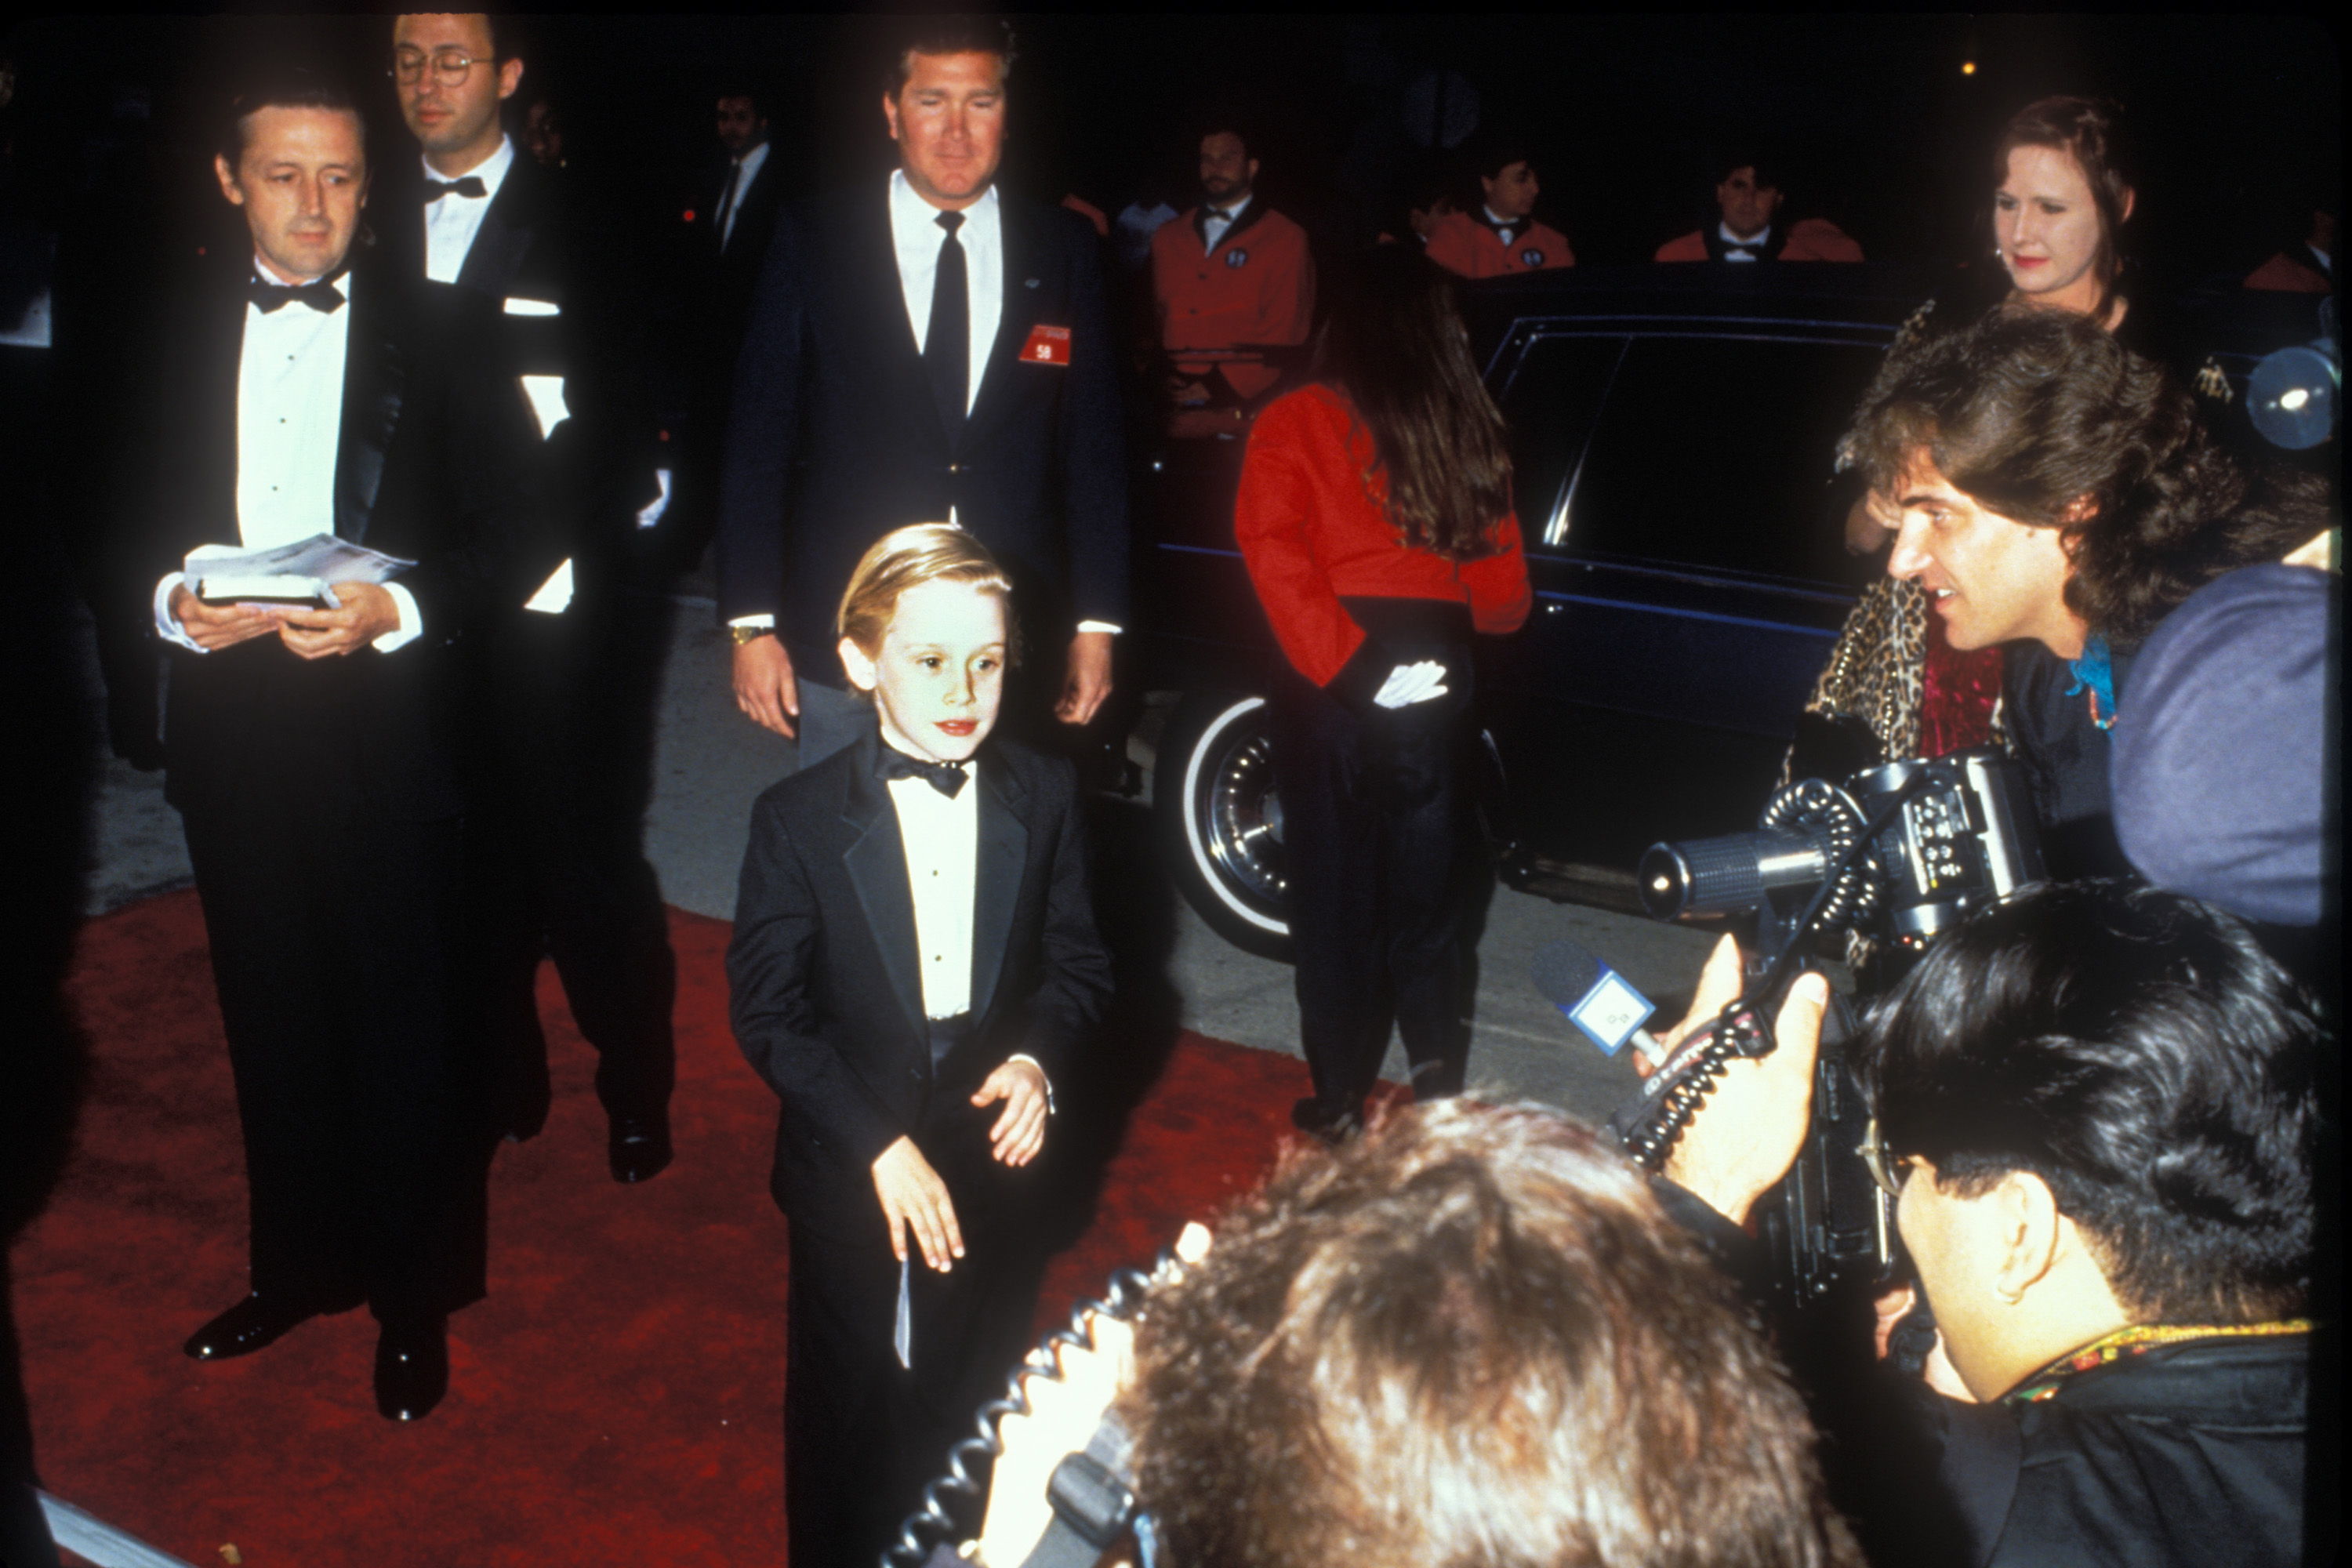 Macaulay Culkin in Hollywood in 1991 | Source: Getty Images